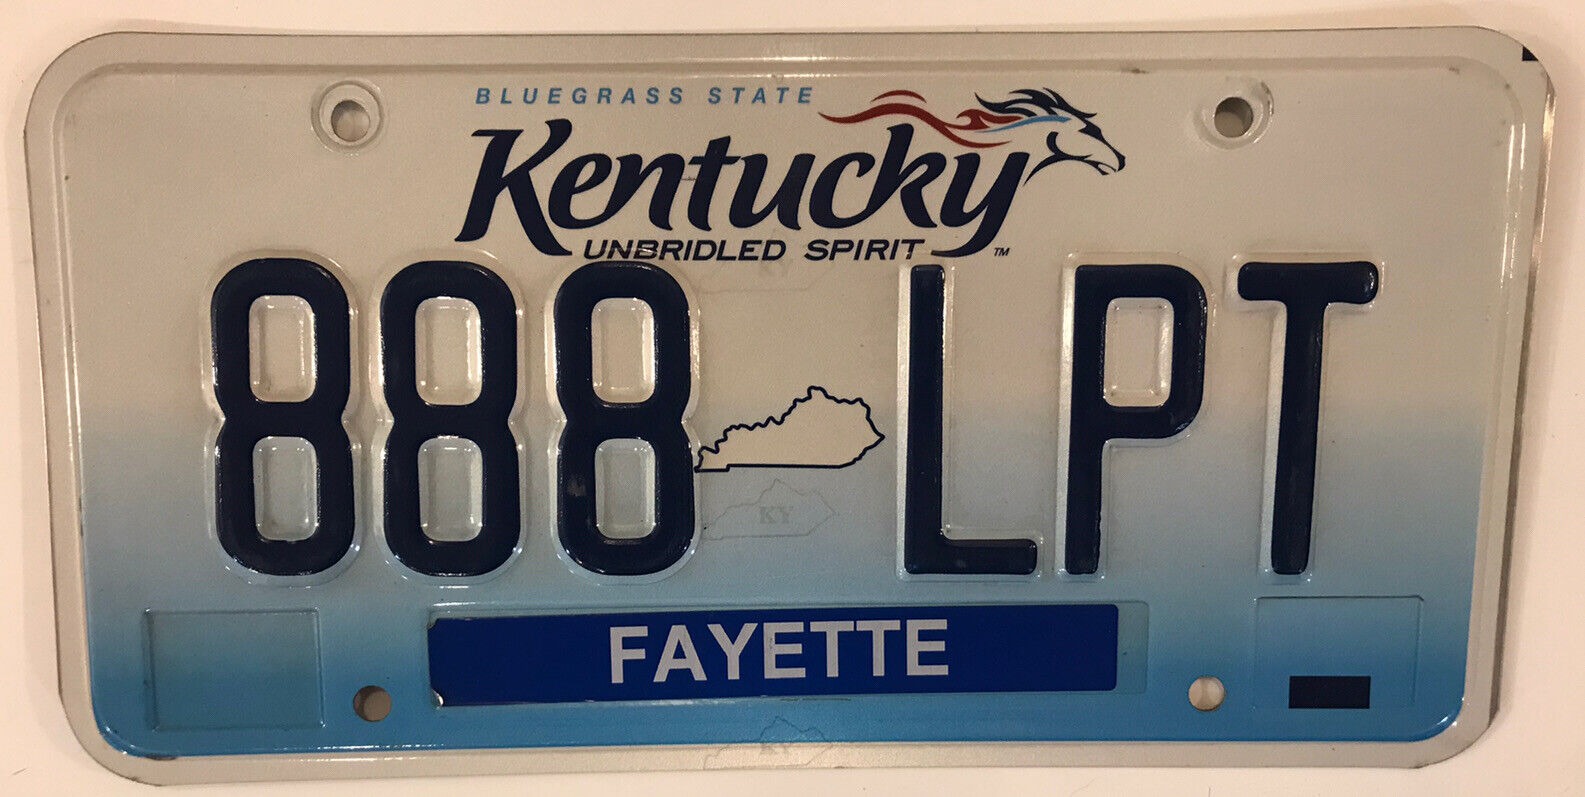 KY TRIPLE Digit 8 888 license plate repeating LPT number Horse Derby Fayette